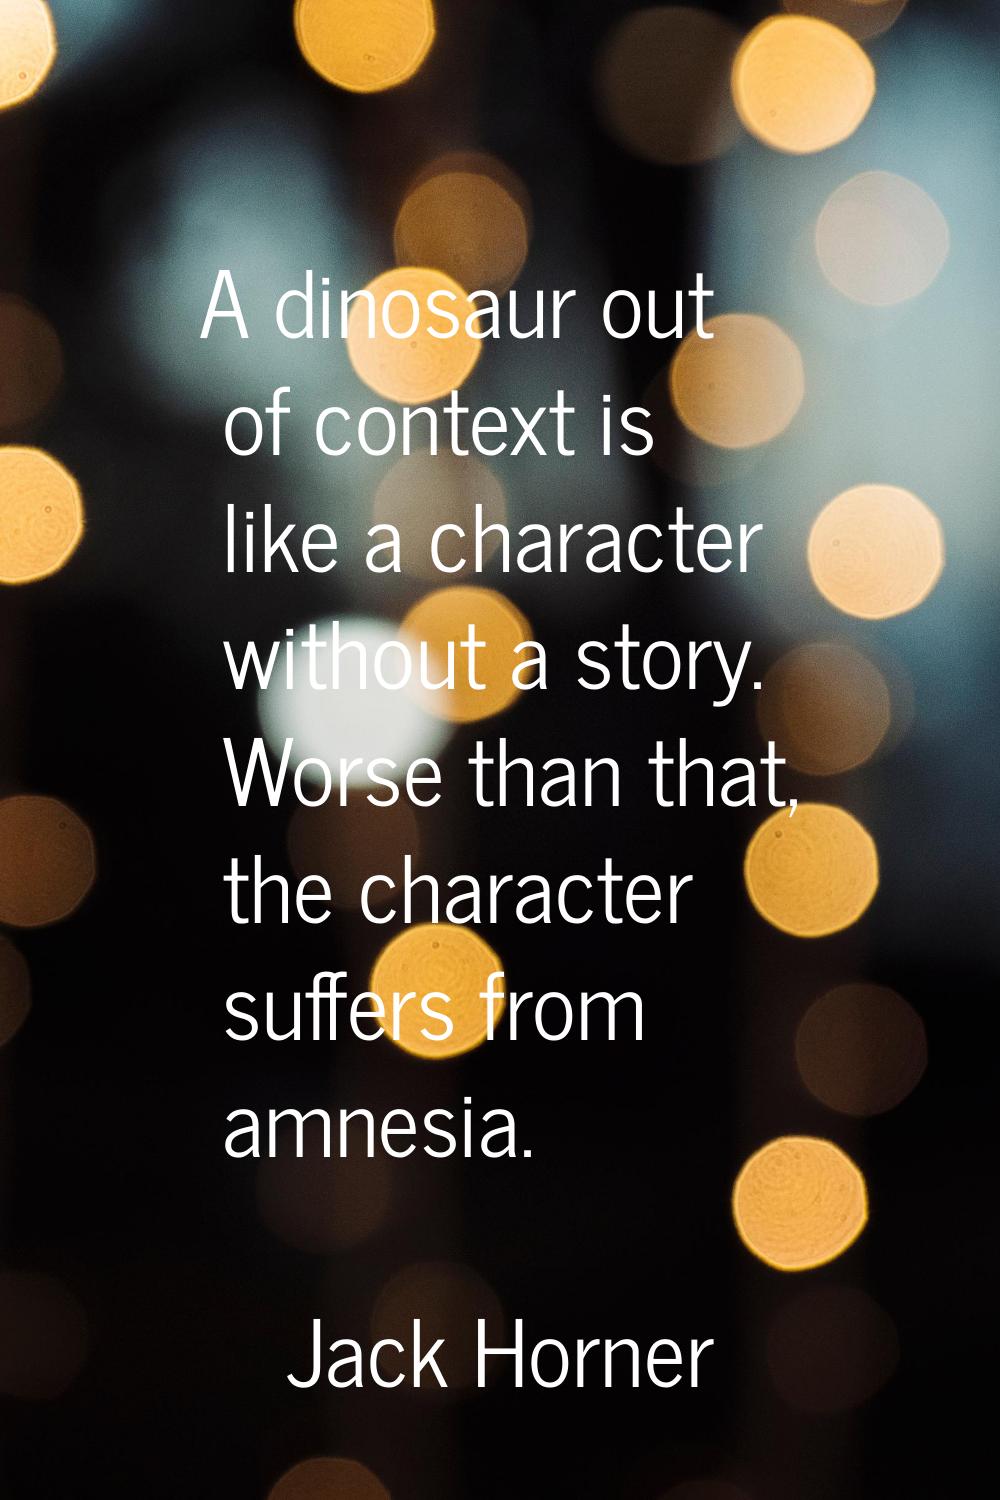 A dinosaur out of context is like a character without a story. Worse than that, the character suffe